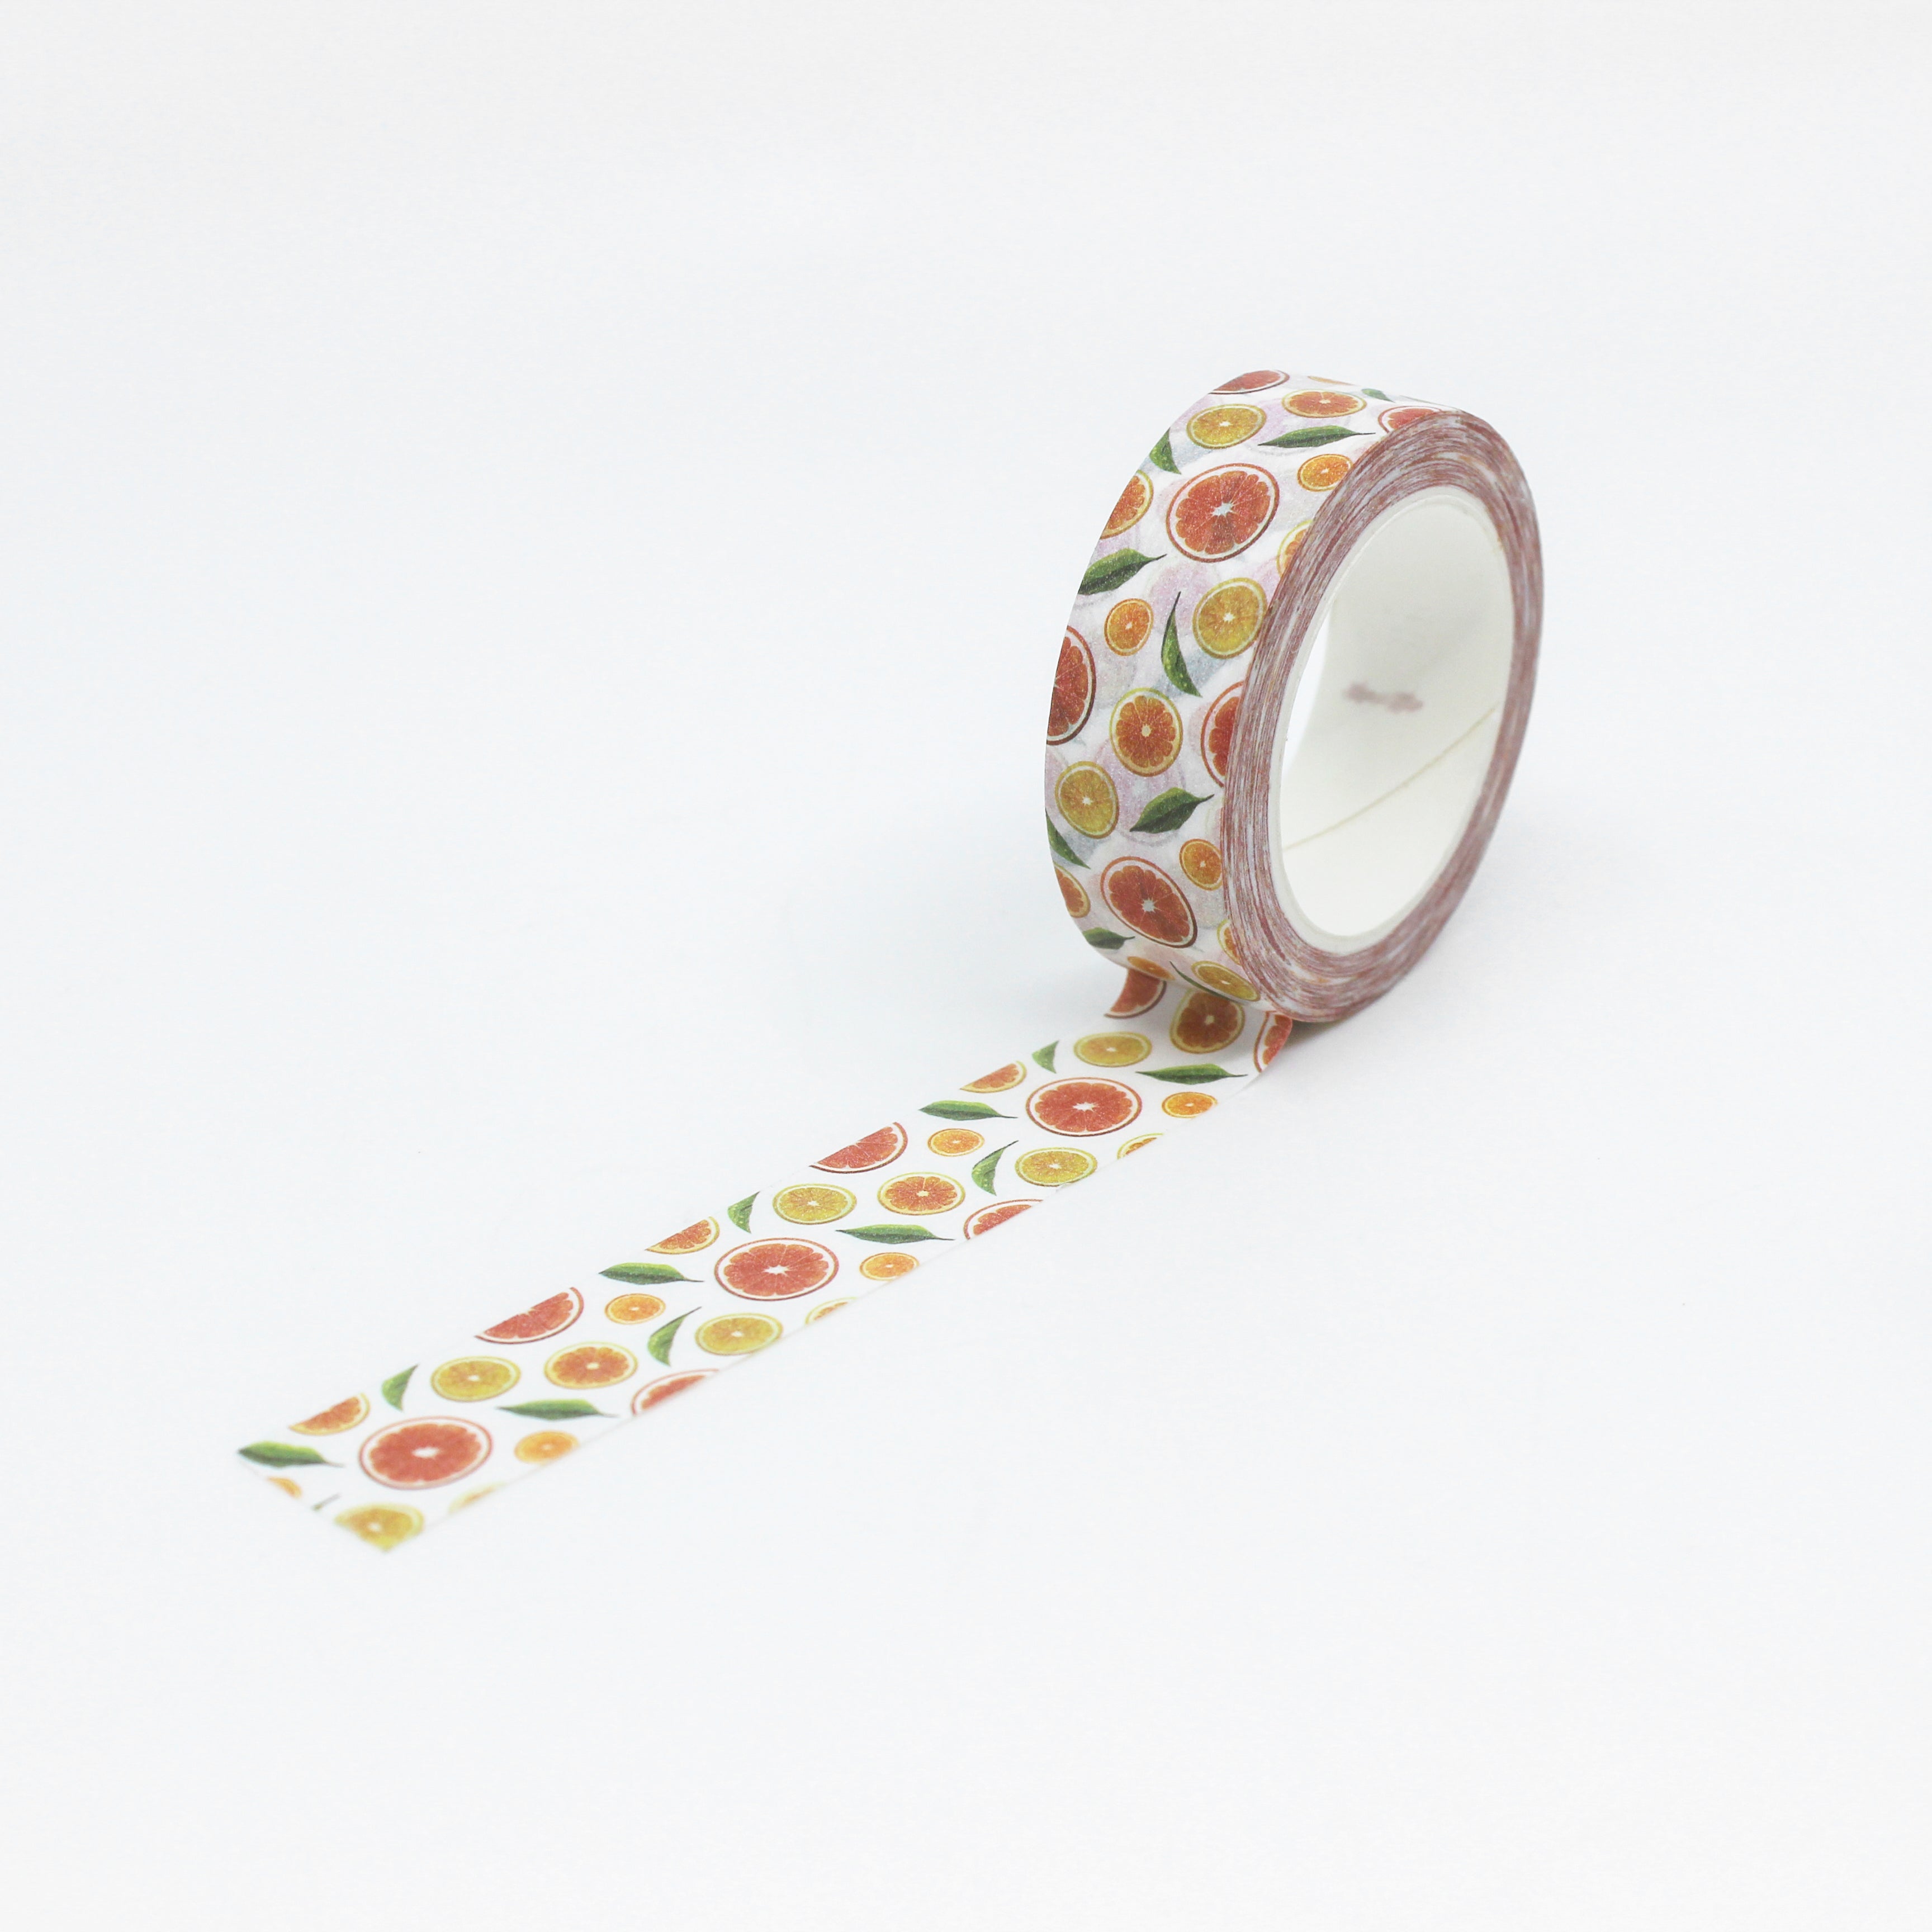 This is a full pattern repeat view of grapefruits tropical fruit collections washi tape from BBB Supplies Craft Shop